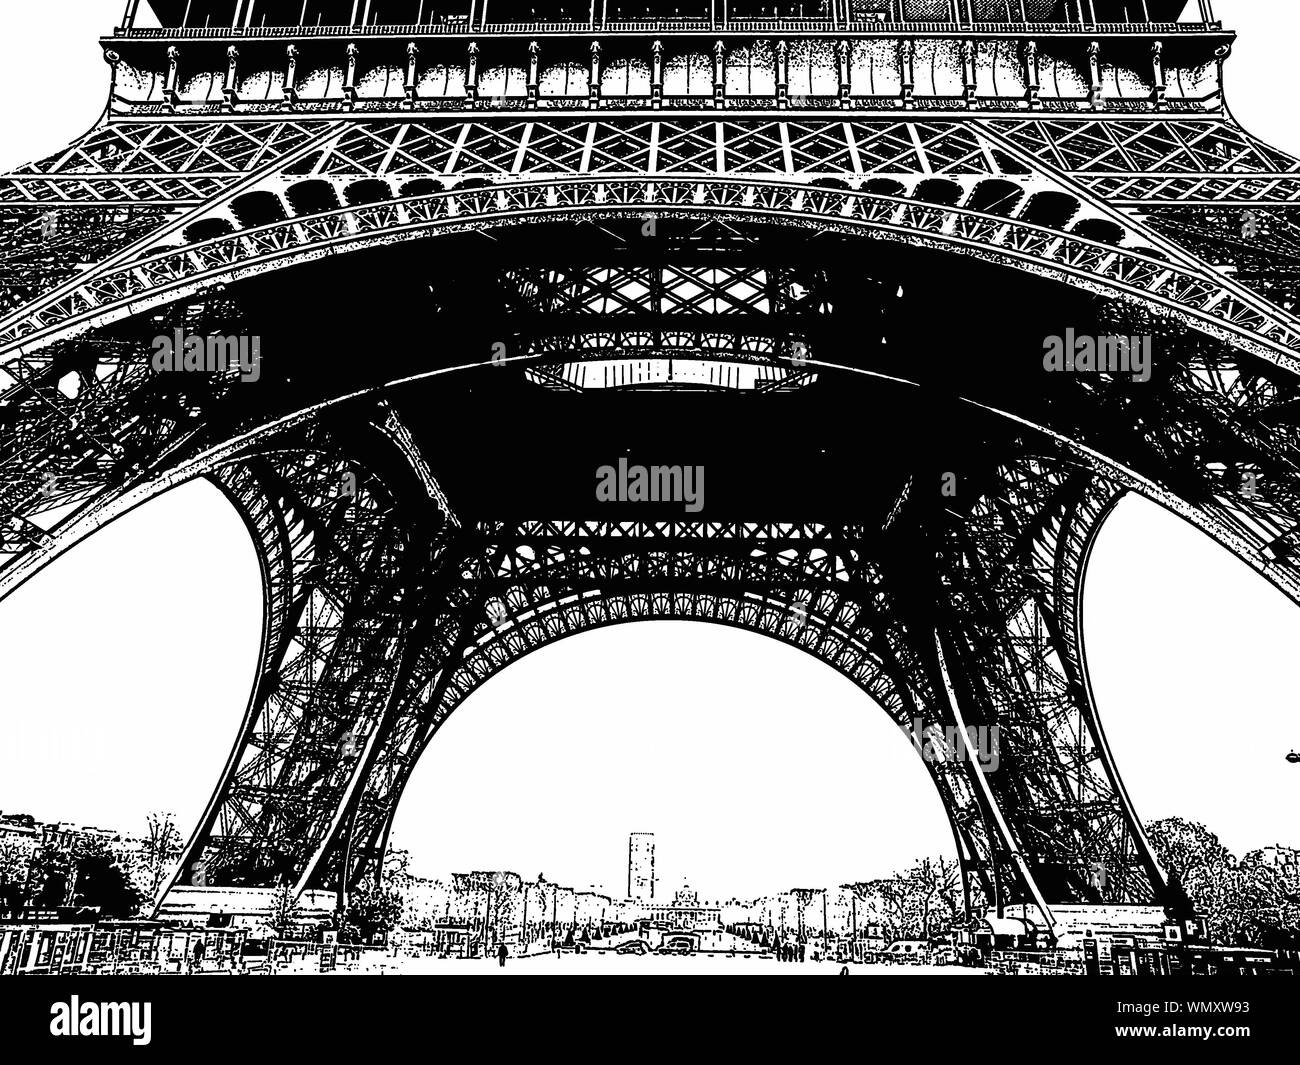 Black and white illustration of the Eiffel Tower structure Stock Photo